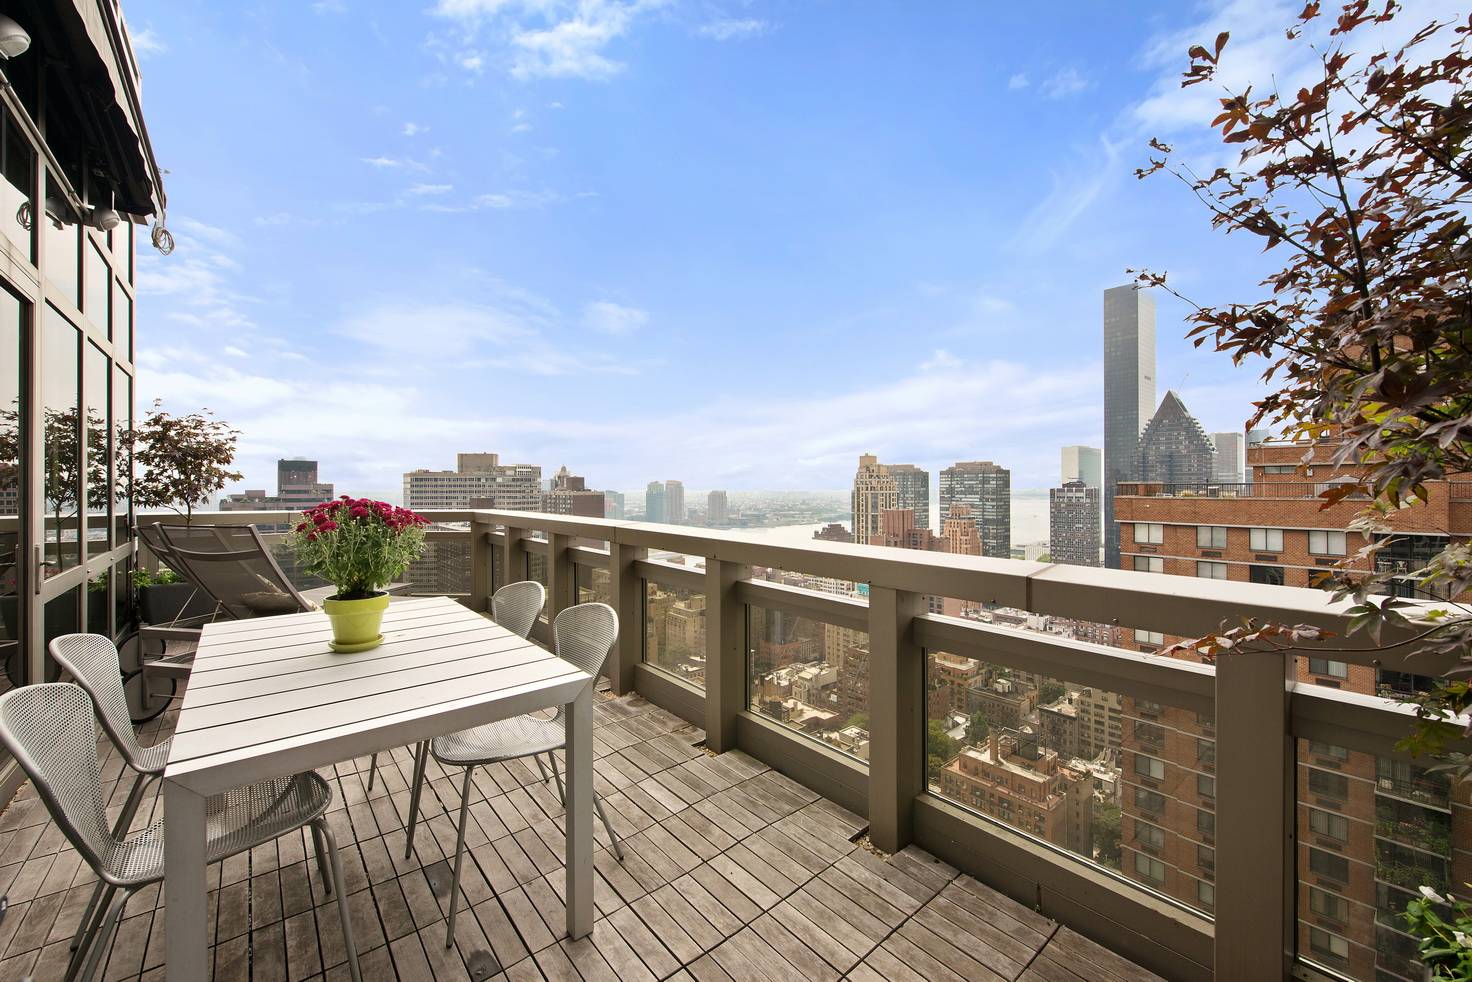 Penthouse 3 bed/3.5 Bath with Private Terrace at the Milan Condominium